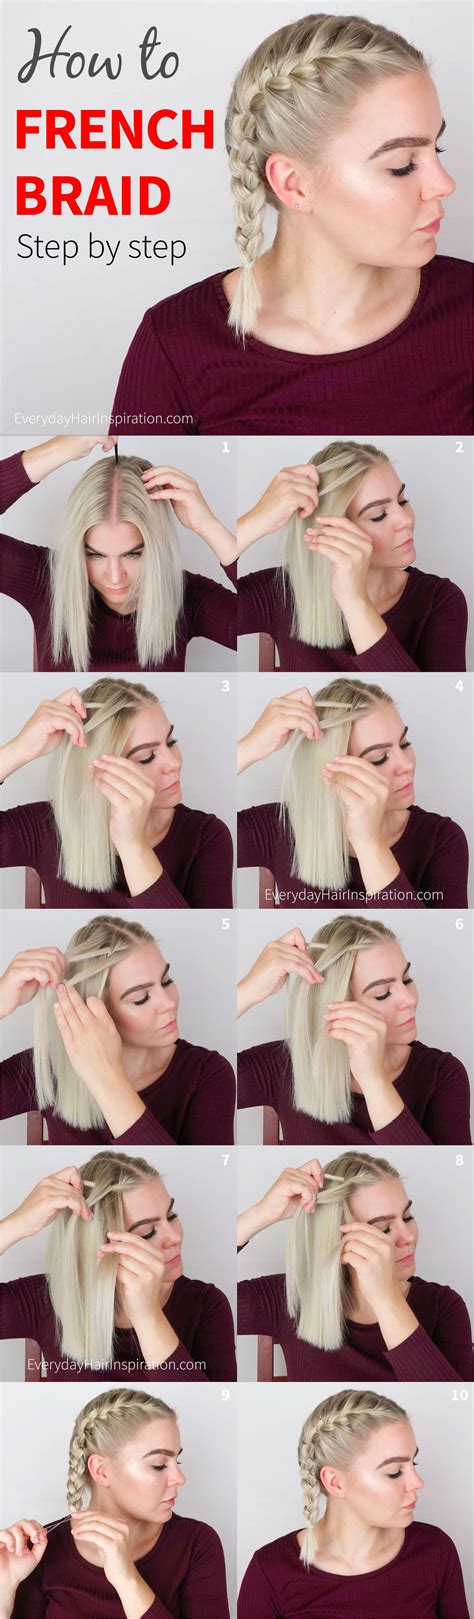 How to box braids for beginners. HOW TO FRENCH BRAID YOUR OWN HAIR STEP BY STEP - Everyday Hair inspiration